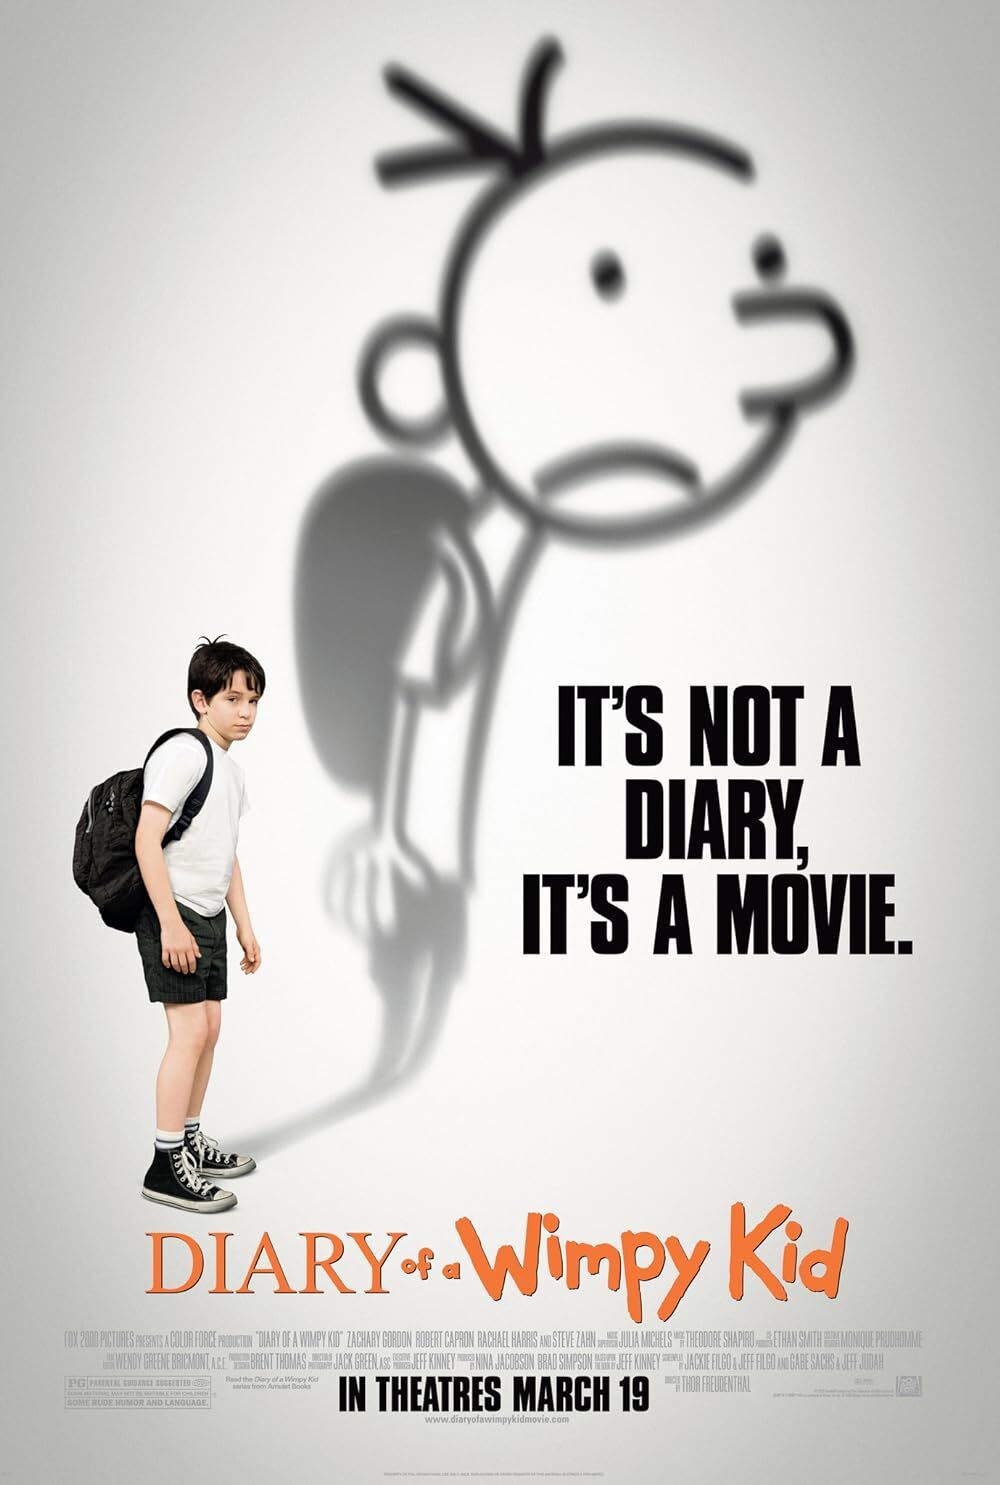 Parents fuming after new Diary of a Wimpy Kid film on Disney